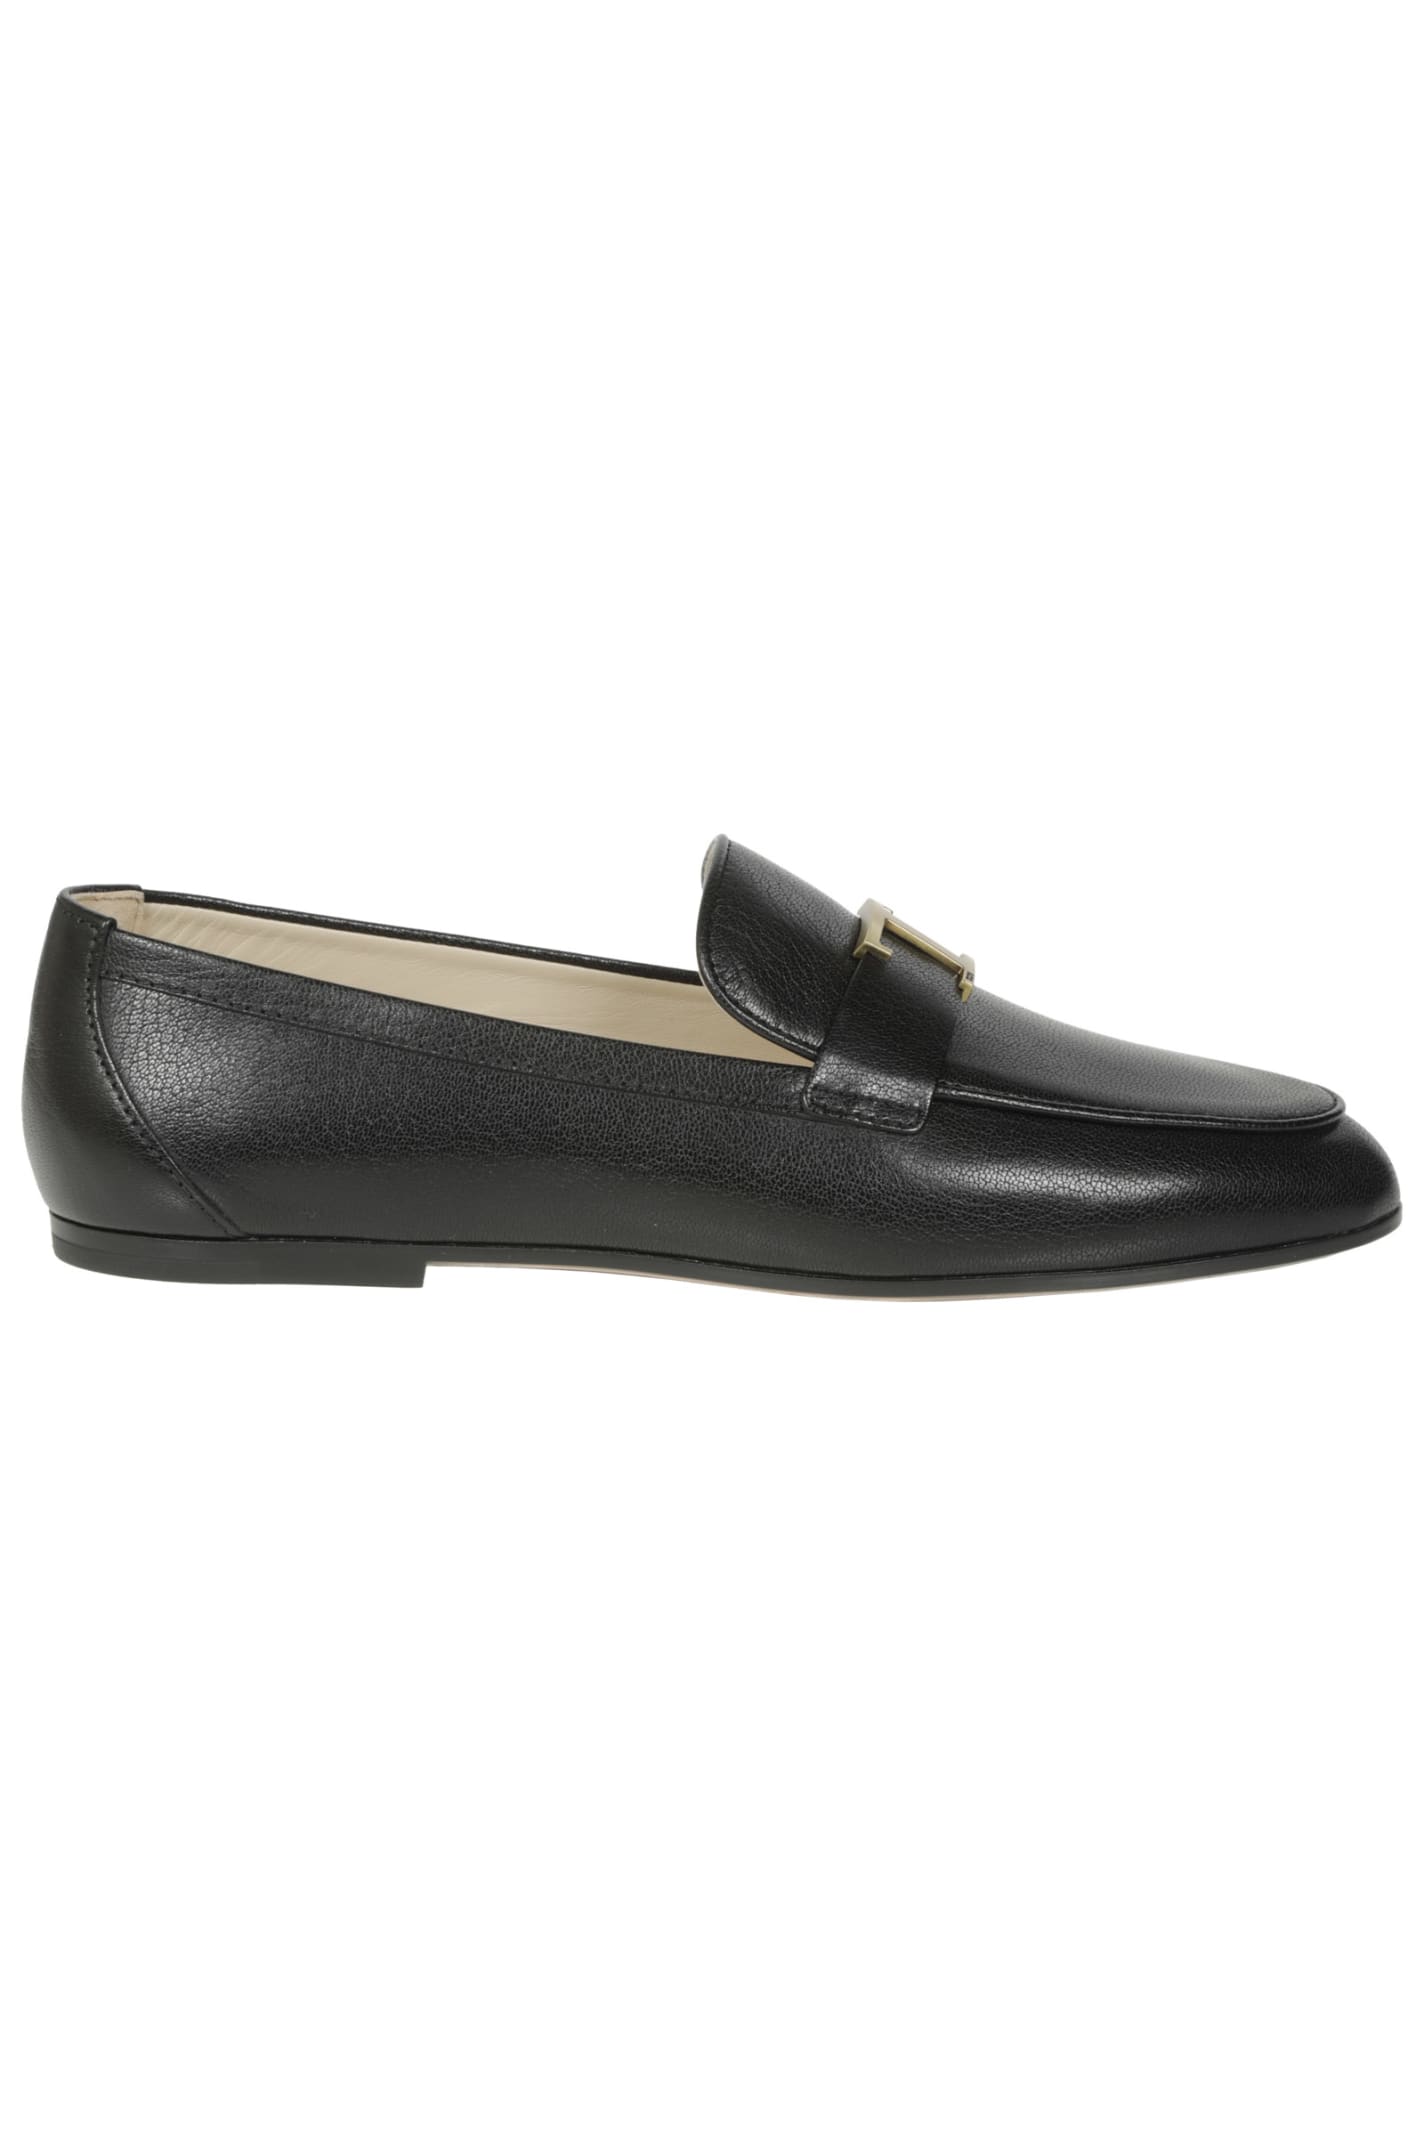 Buy Tods Logo Plaque Loafers online, shop Tods shoes with free shipping